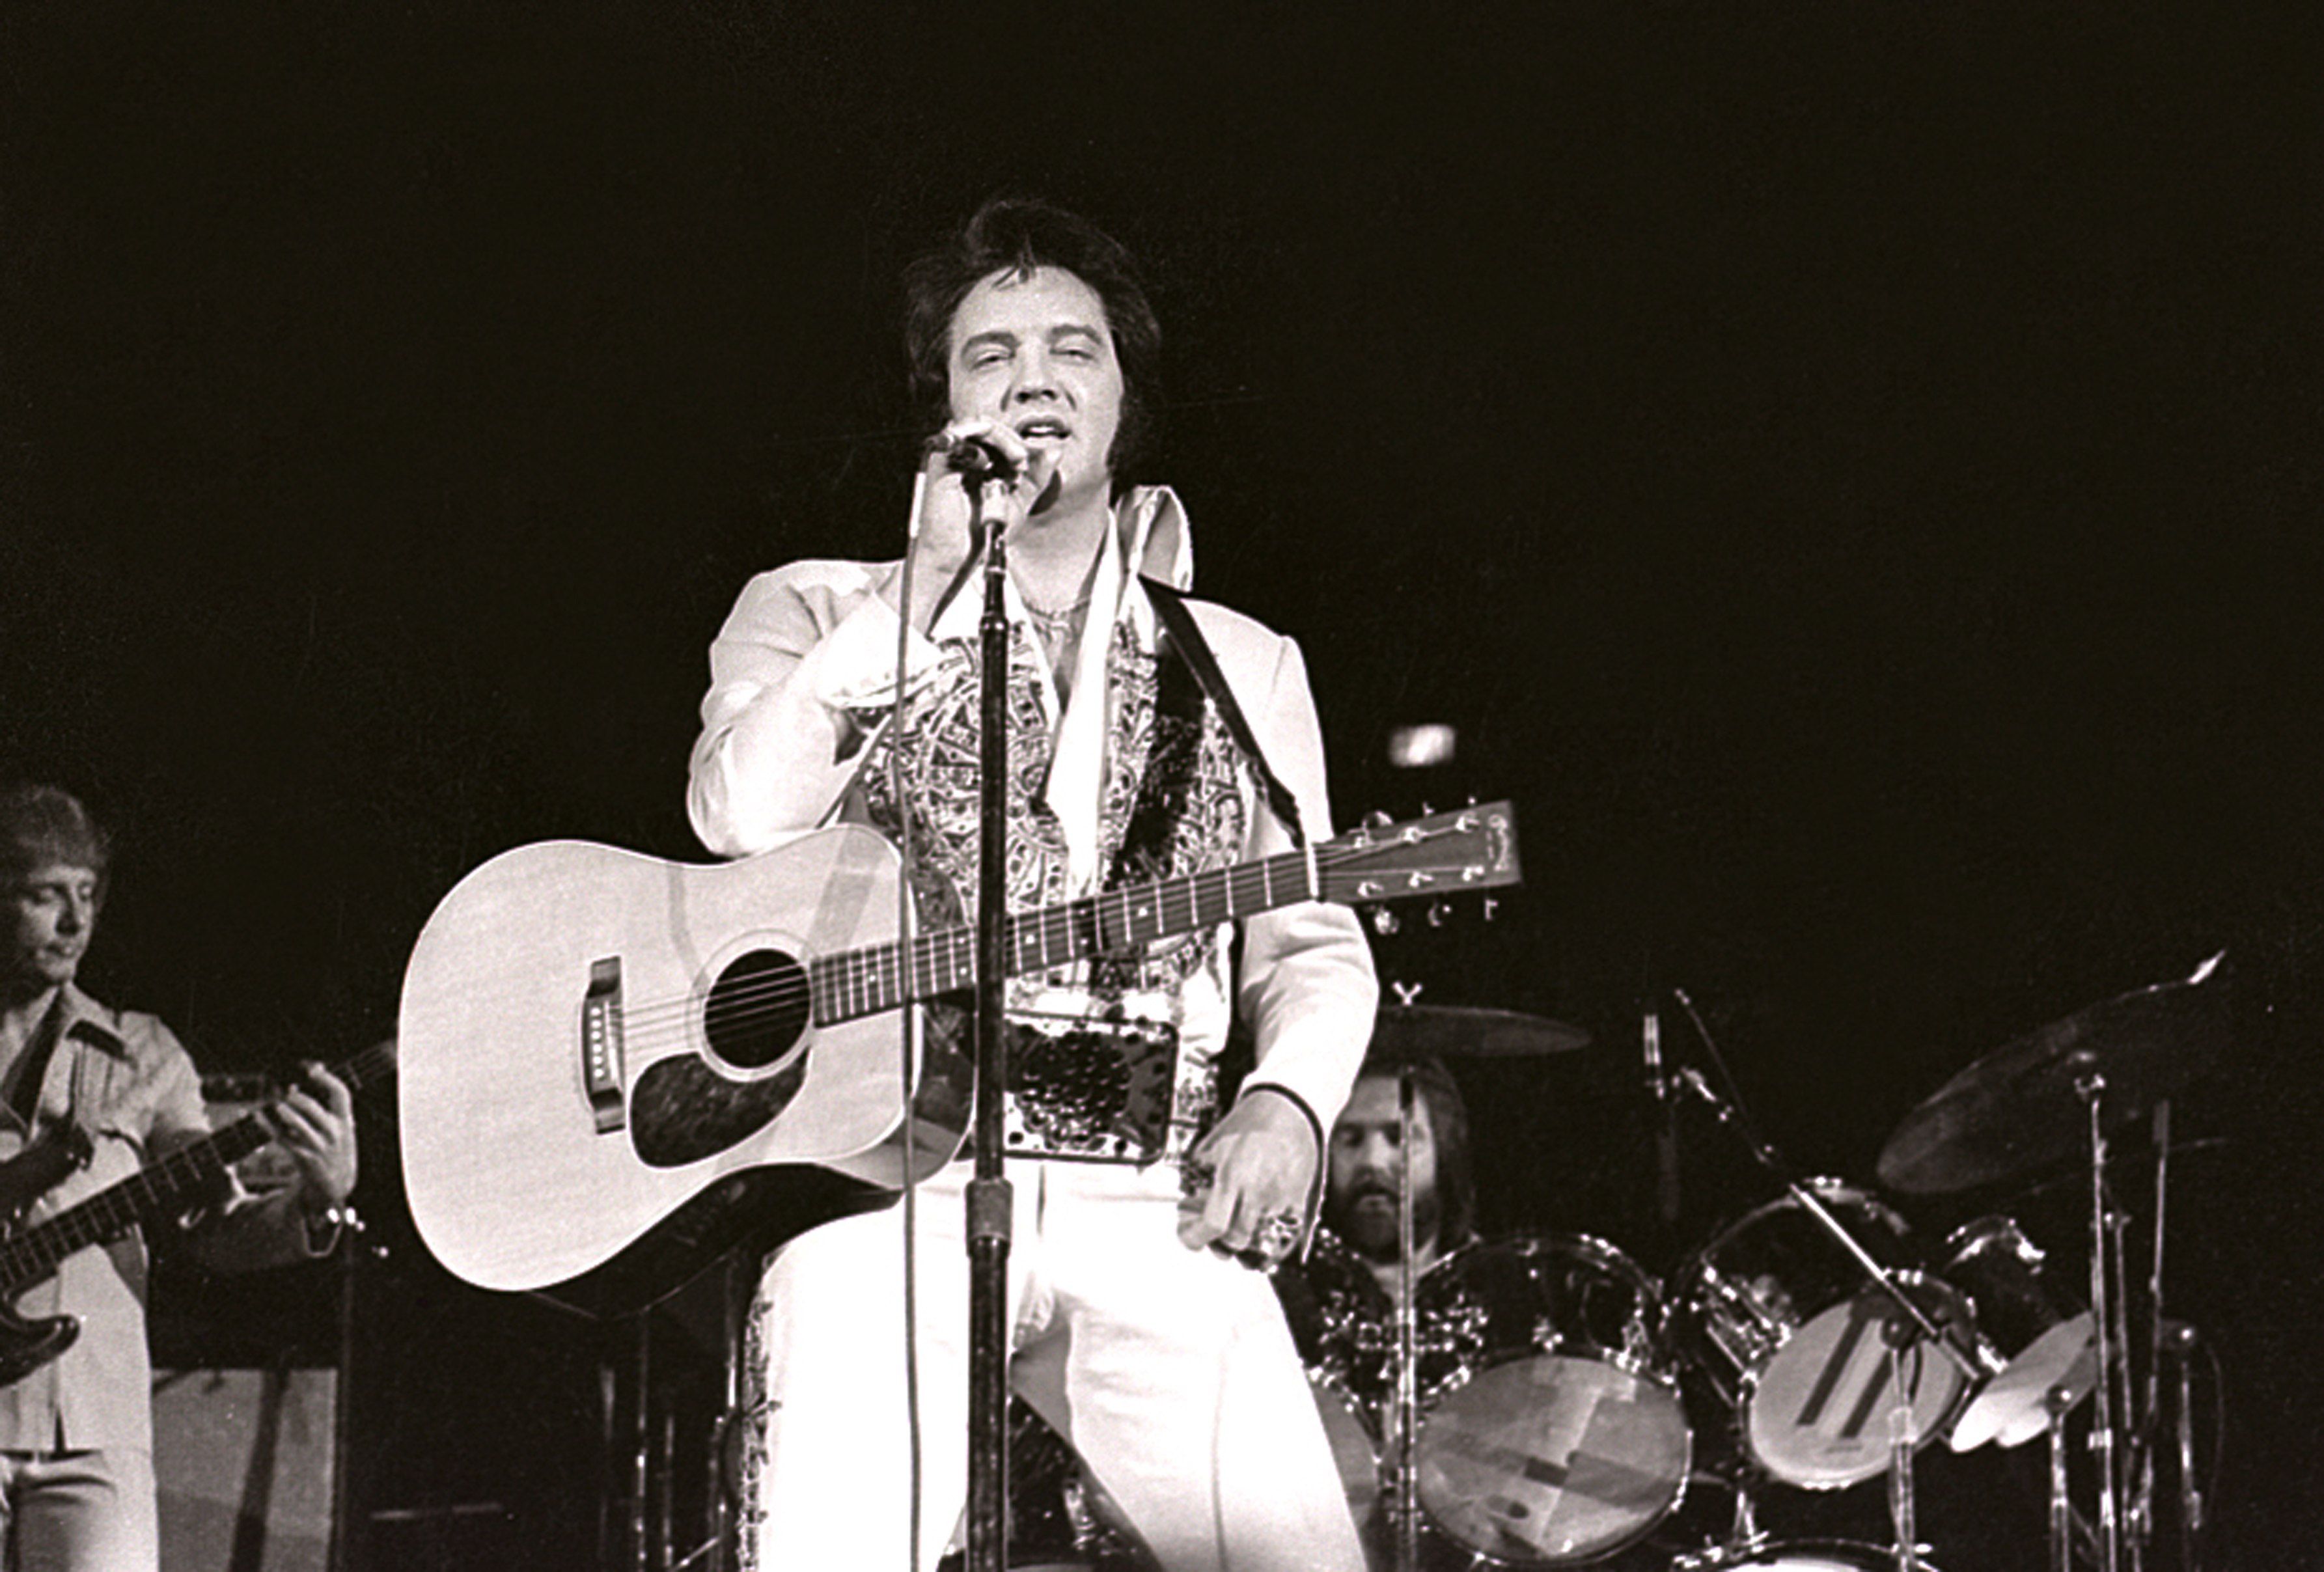 Elvis Presley at the Milwaukee Arena on April 27, l977 in Milwaukee, Wisconsin. | Source: Getty Images